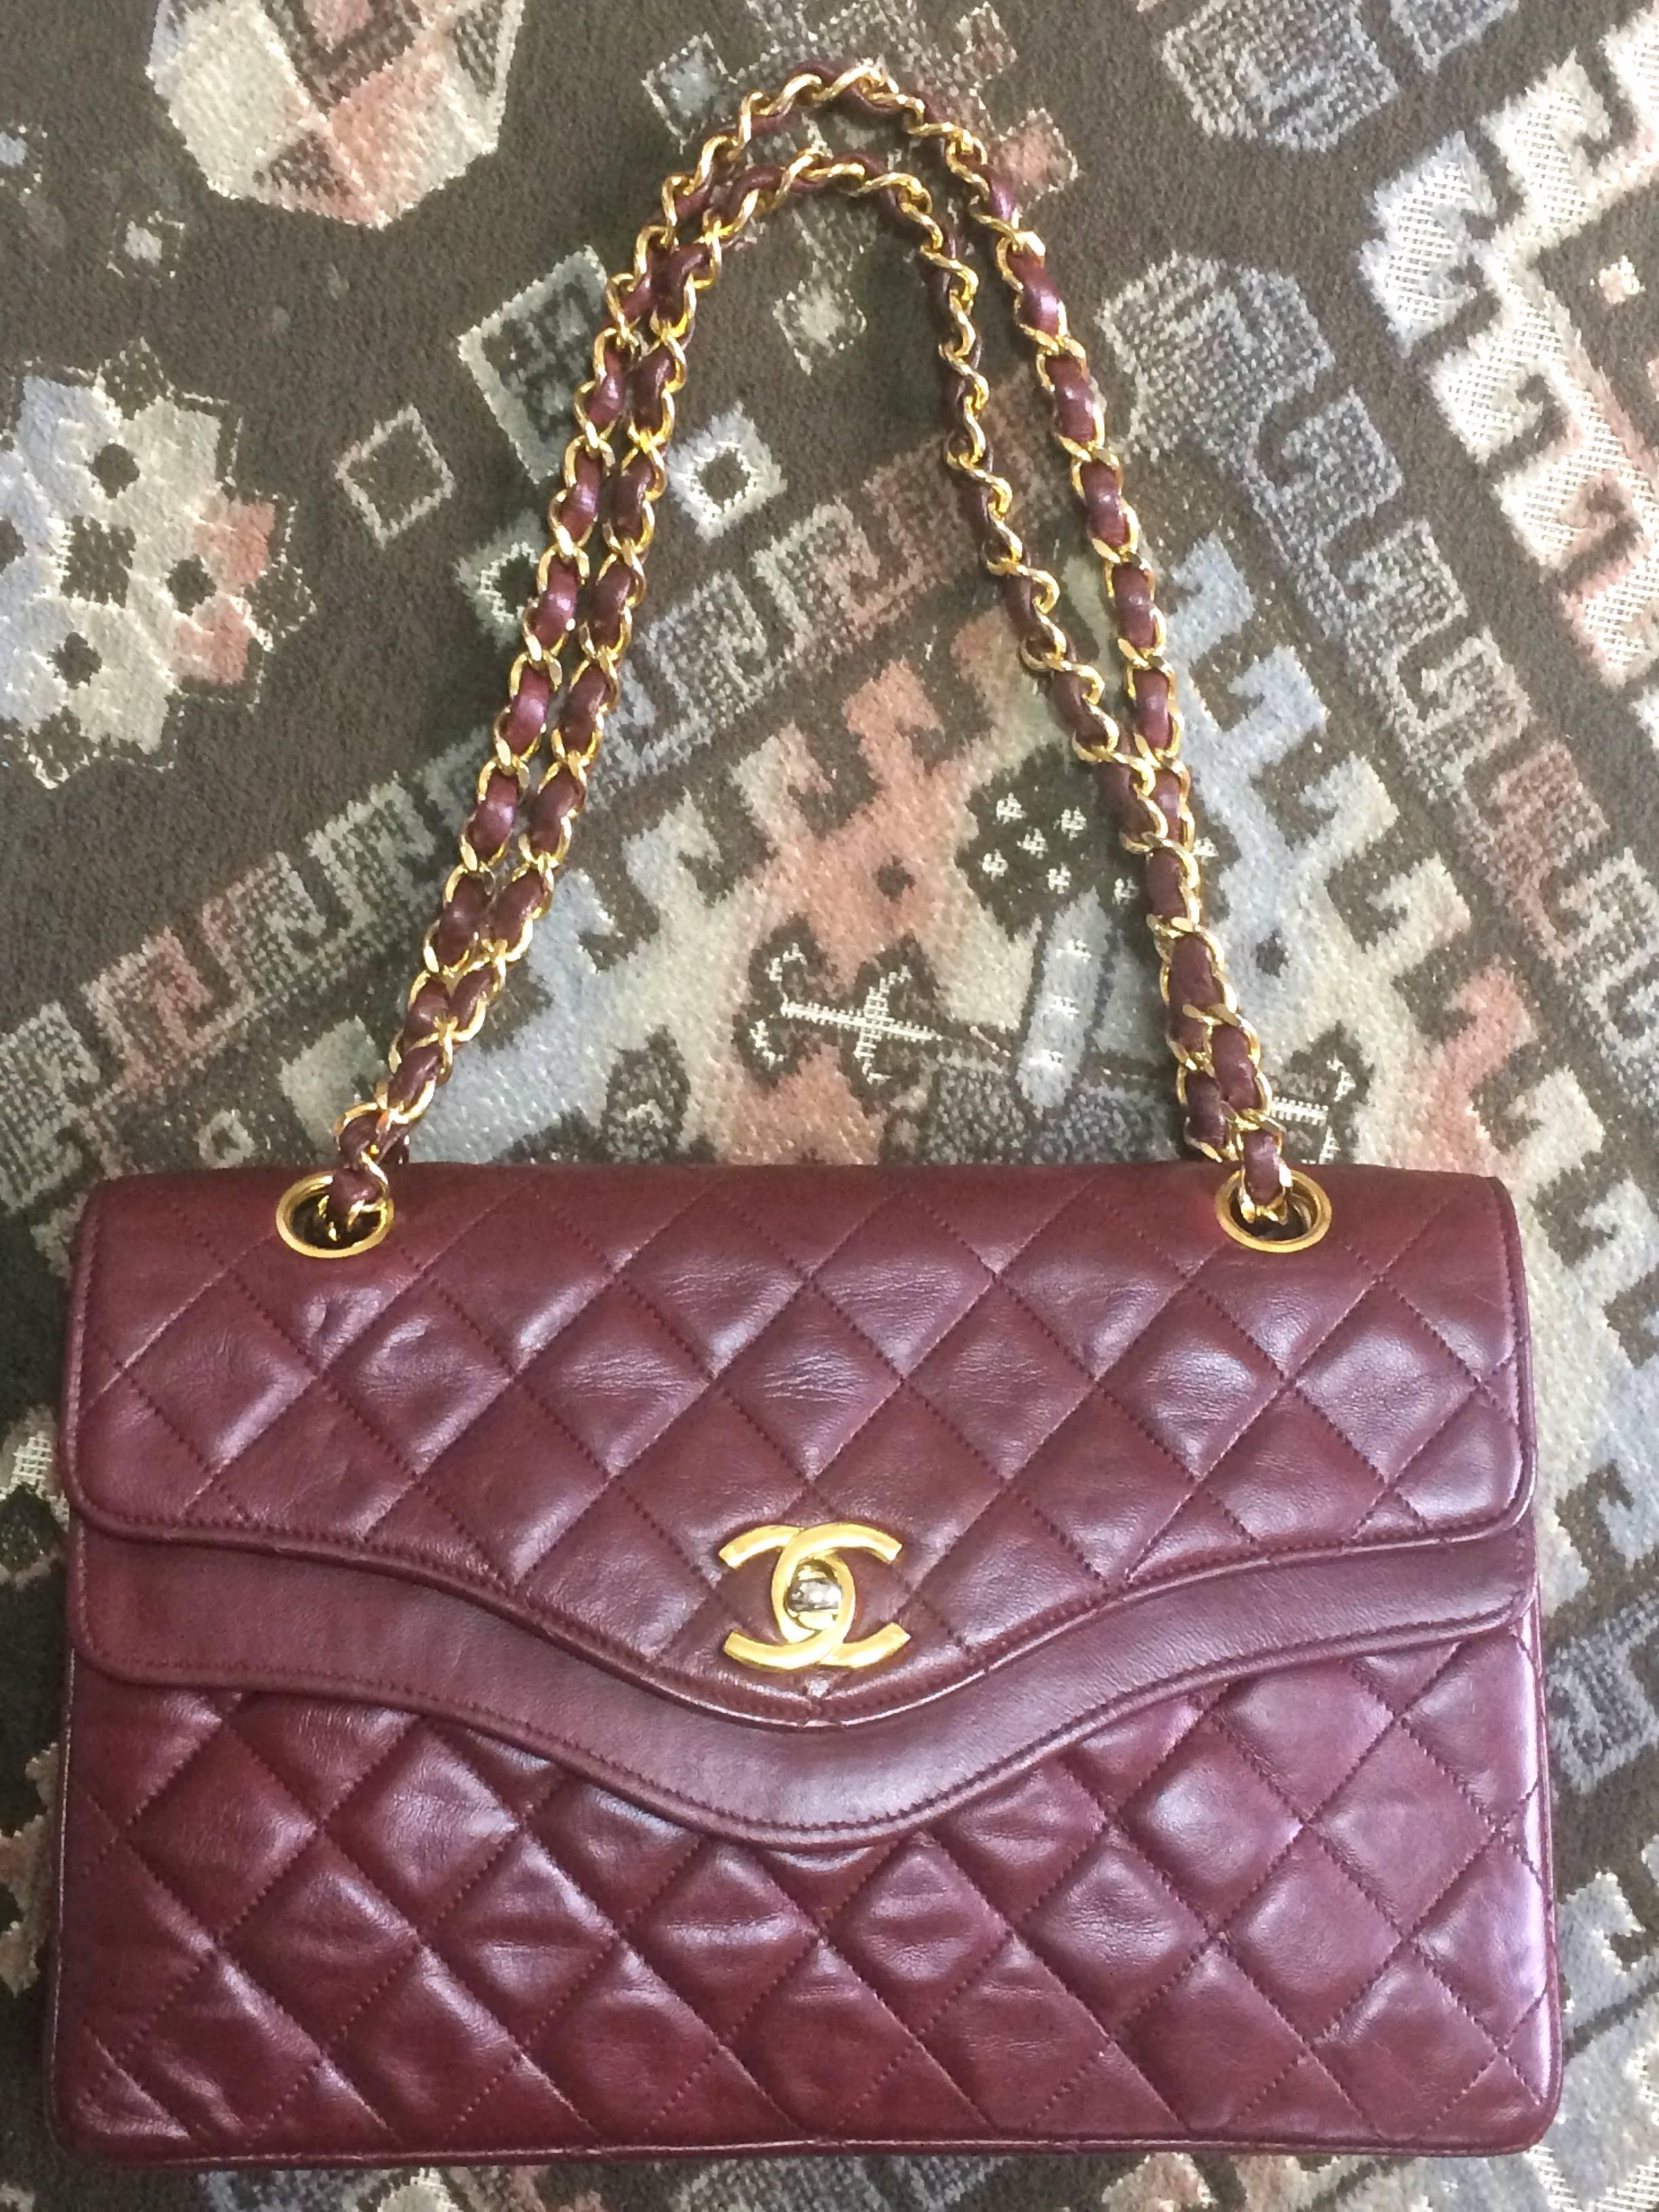 1970's, 1980's vintage Chanel wine lambskin rare design 2.55 purse with double flap and wavy flap design. One-of-a-kind bag.

Introducing another rare vintage Chanel bag, wine lambskin rare design 2.55 purse with double flap and wavy flap design.